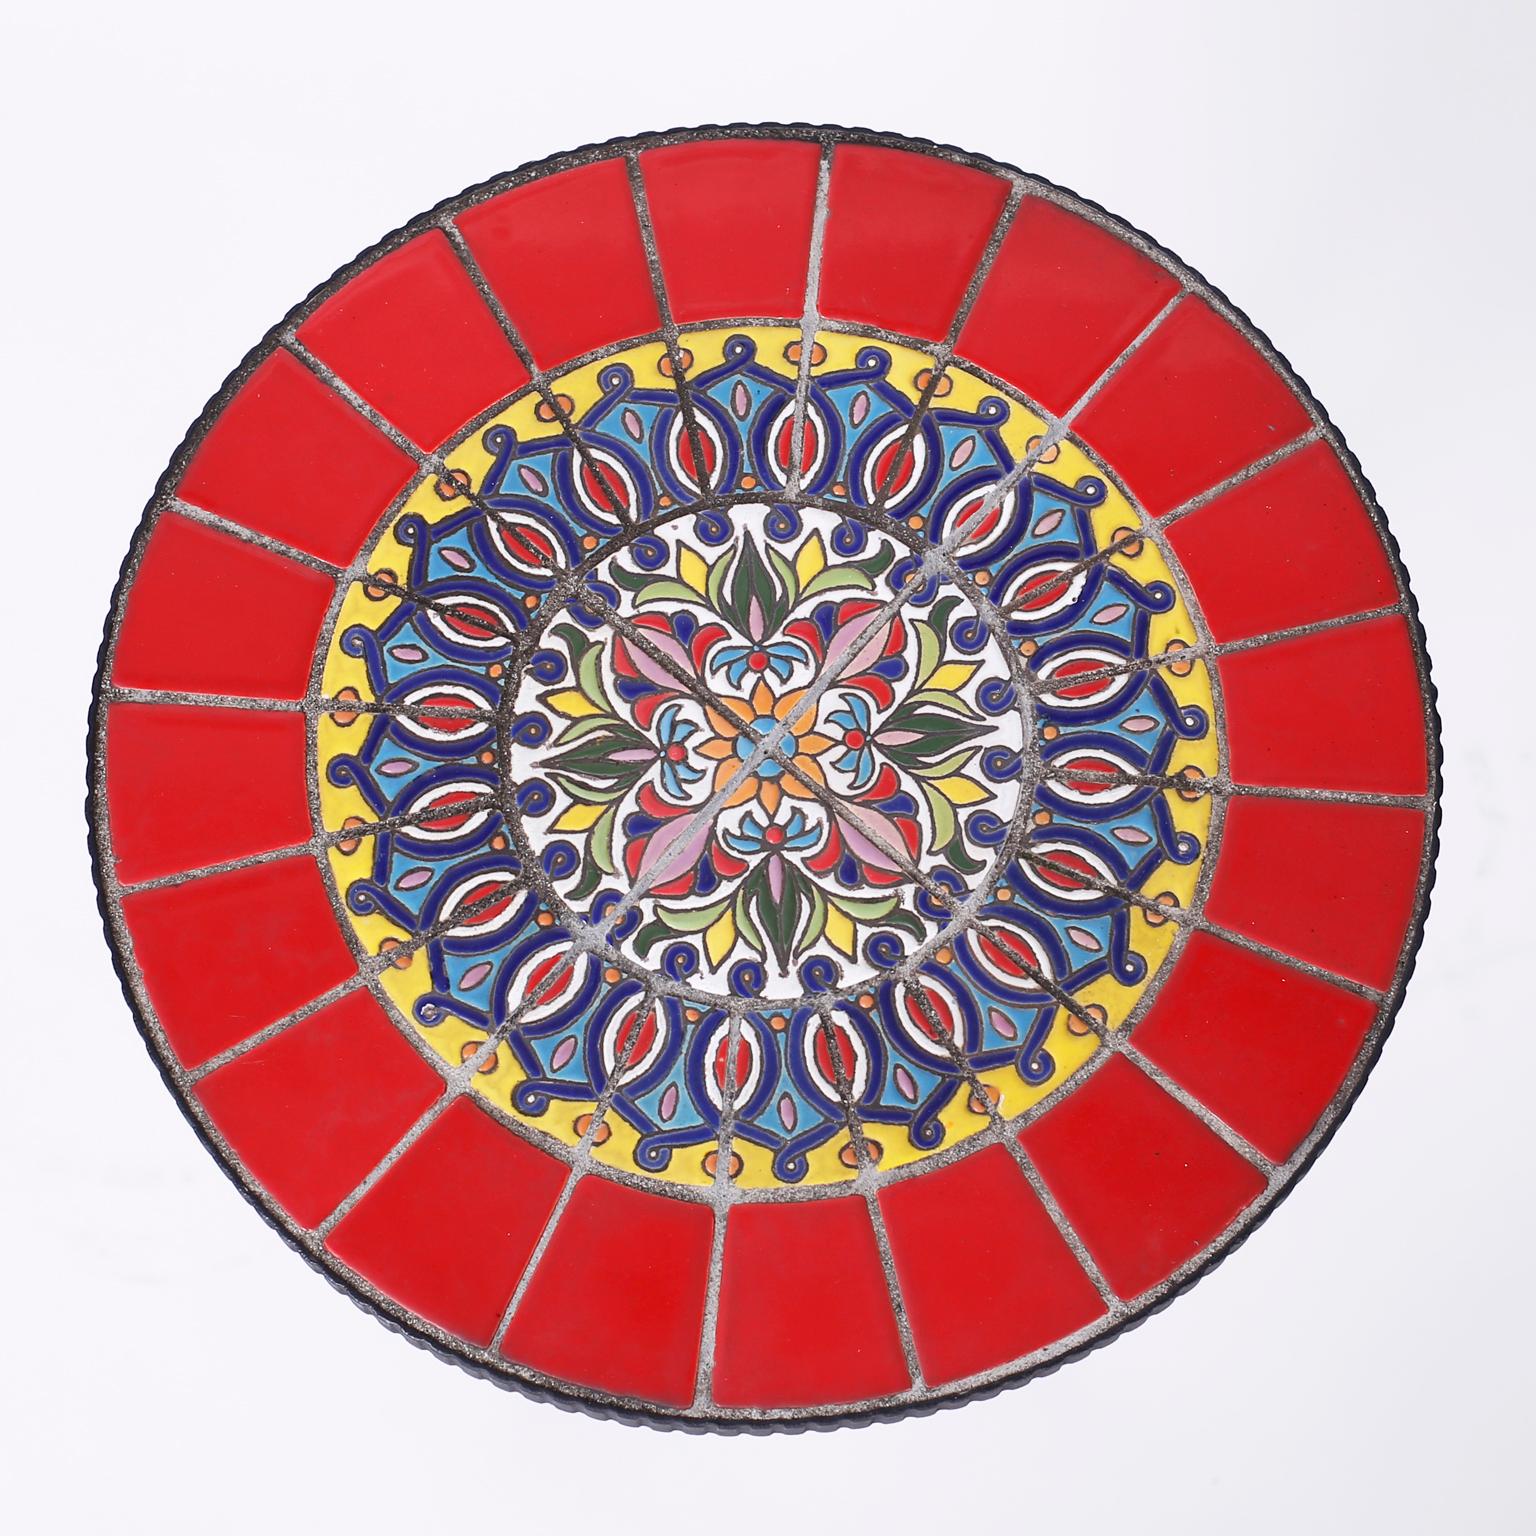 Midcentury tabouret or table with an iron base and a bold colorful kaleidoscopic tile top with floral and geometric designs.